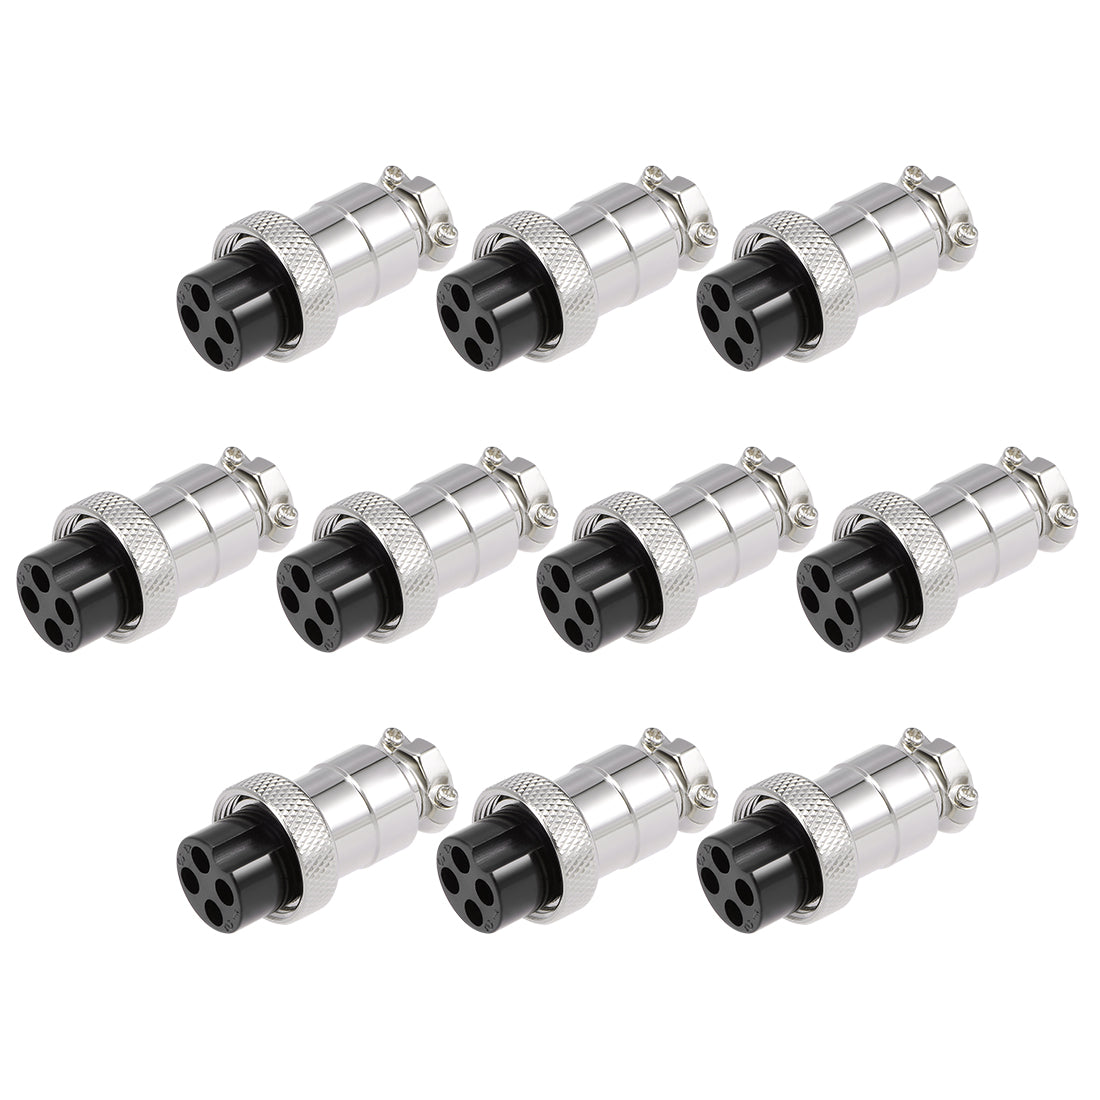 uxcell Uxcell 10PCS Aviation Connector 16mm 4P 5A 125V DF16 Waterproof Female Wire Panel Power Chassis Metal Fittings Connector Aviation Silver Tone